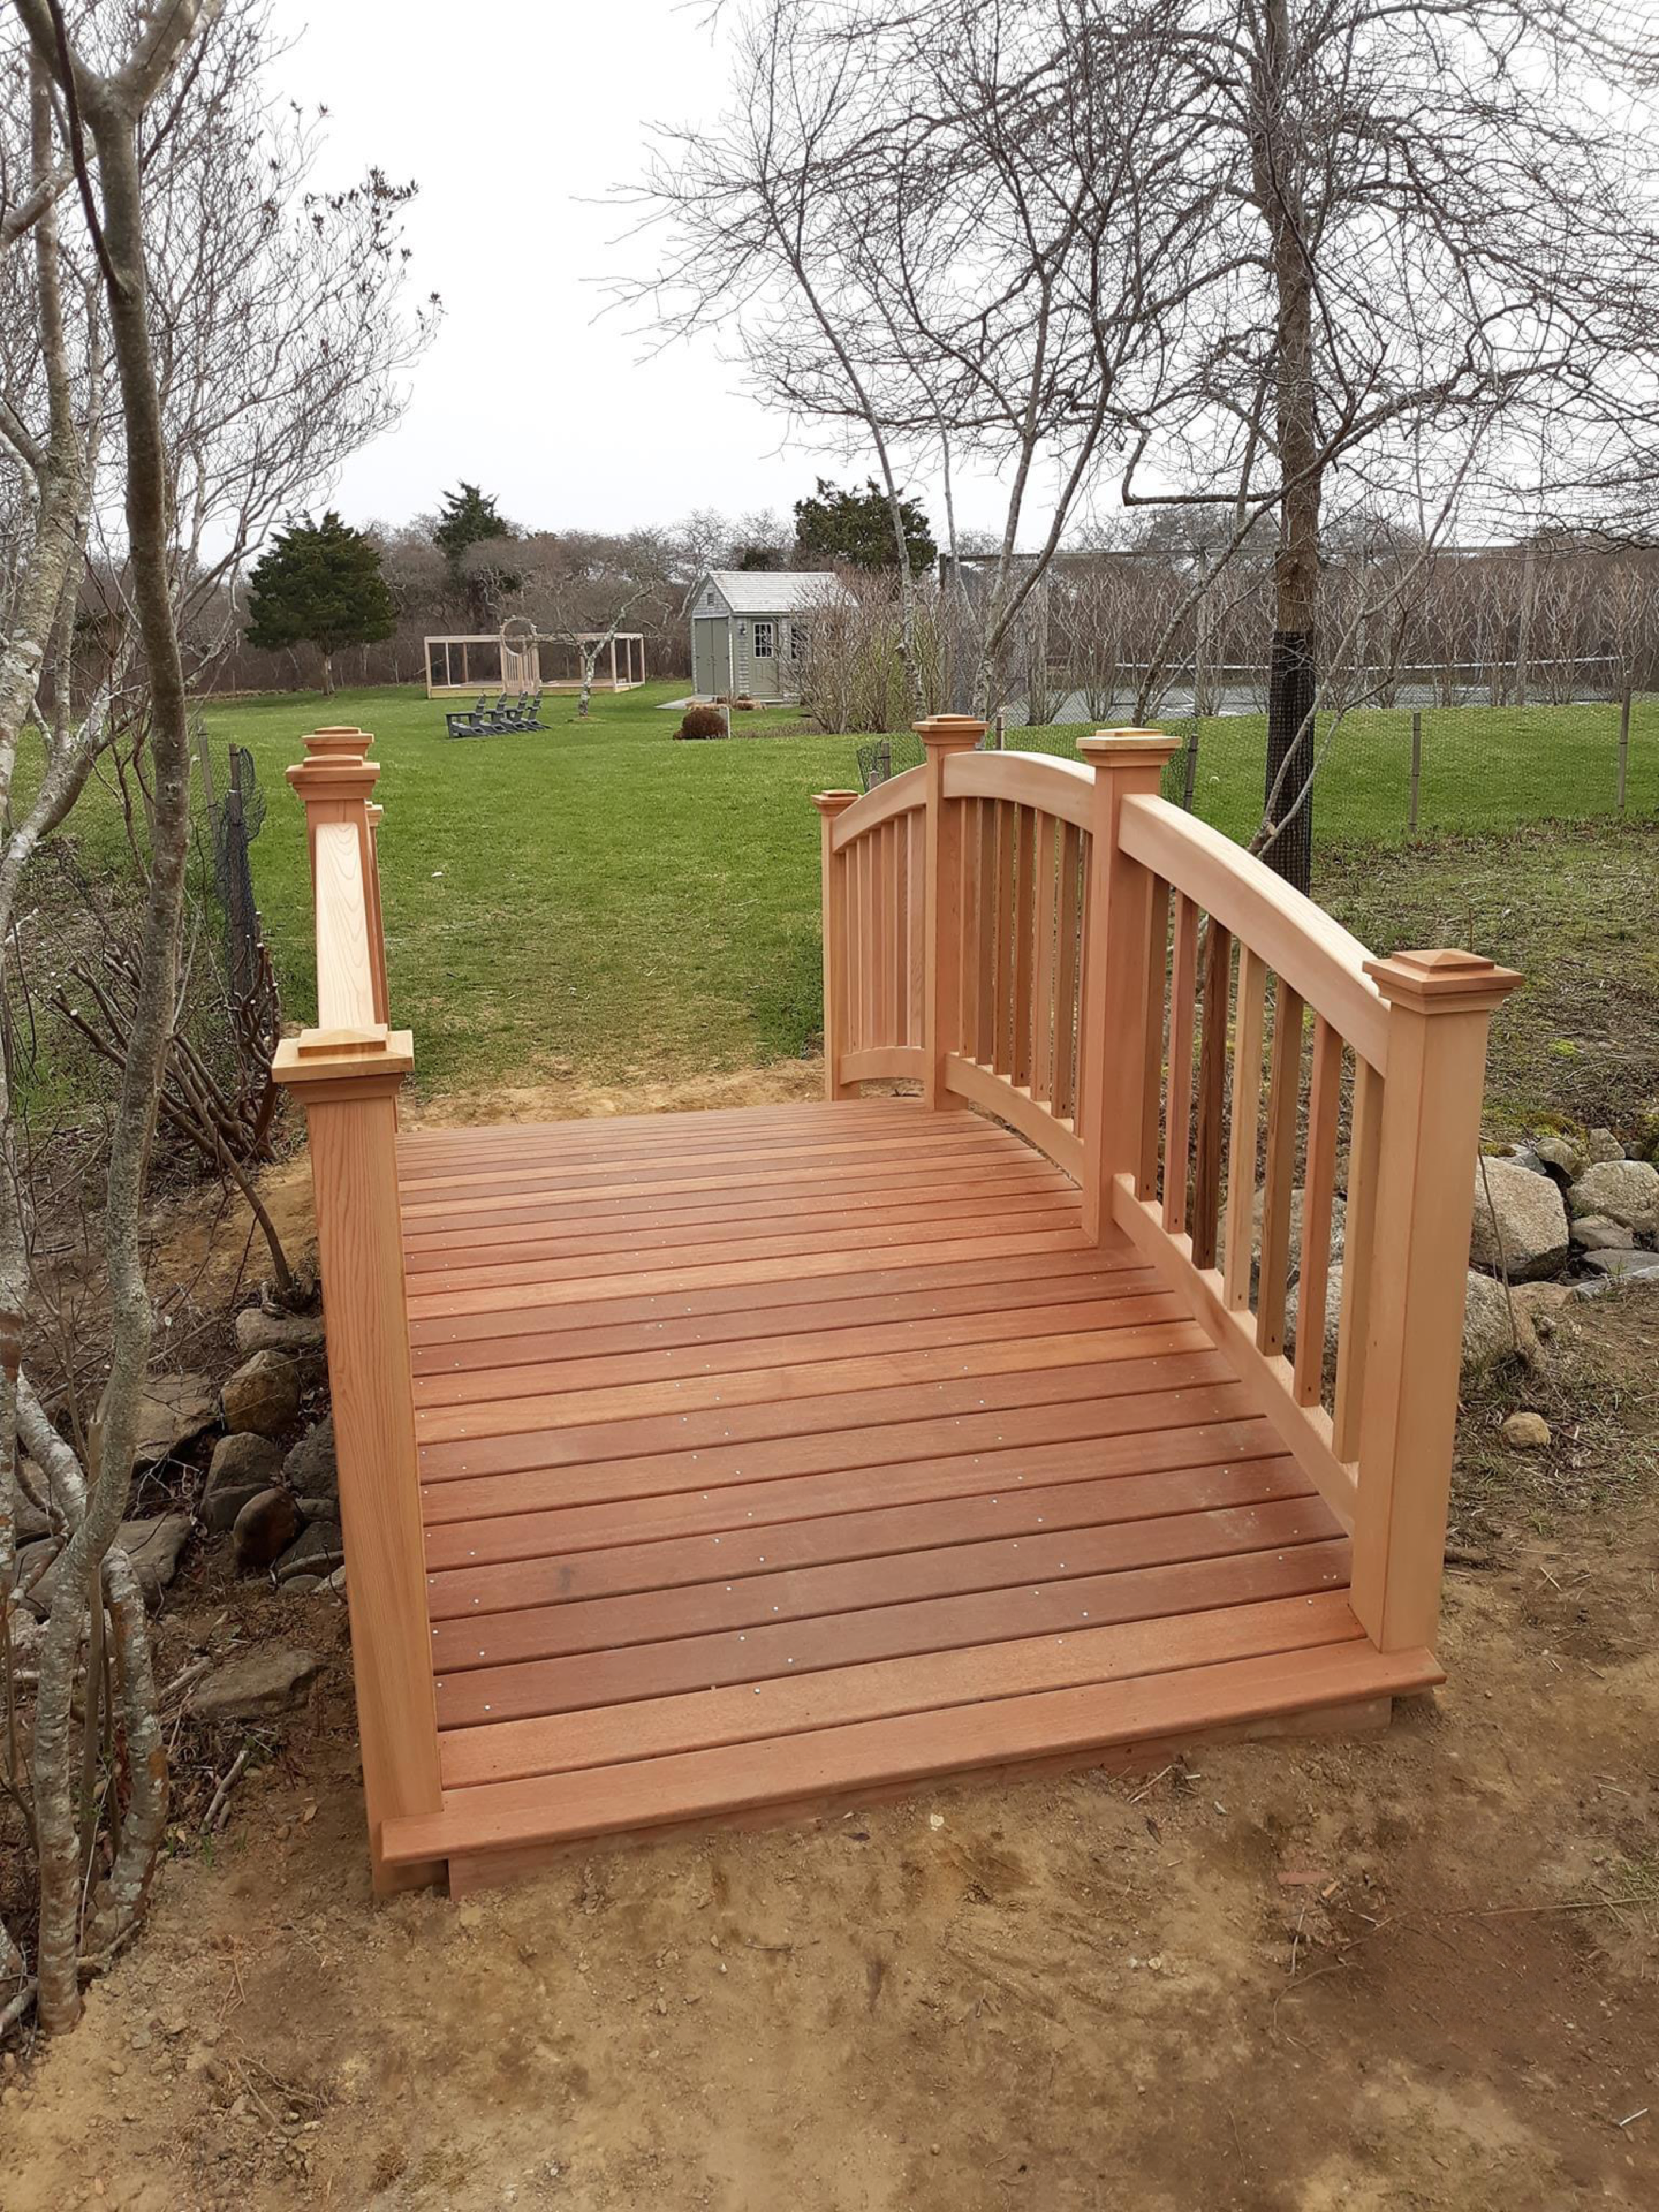 A custom-built wooden walkway in a Nantucket backyard. It is going over a small waterway and is constructed entirely of wood.